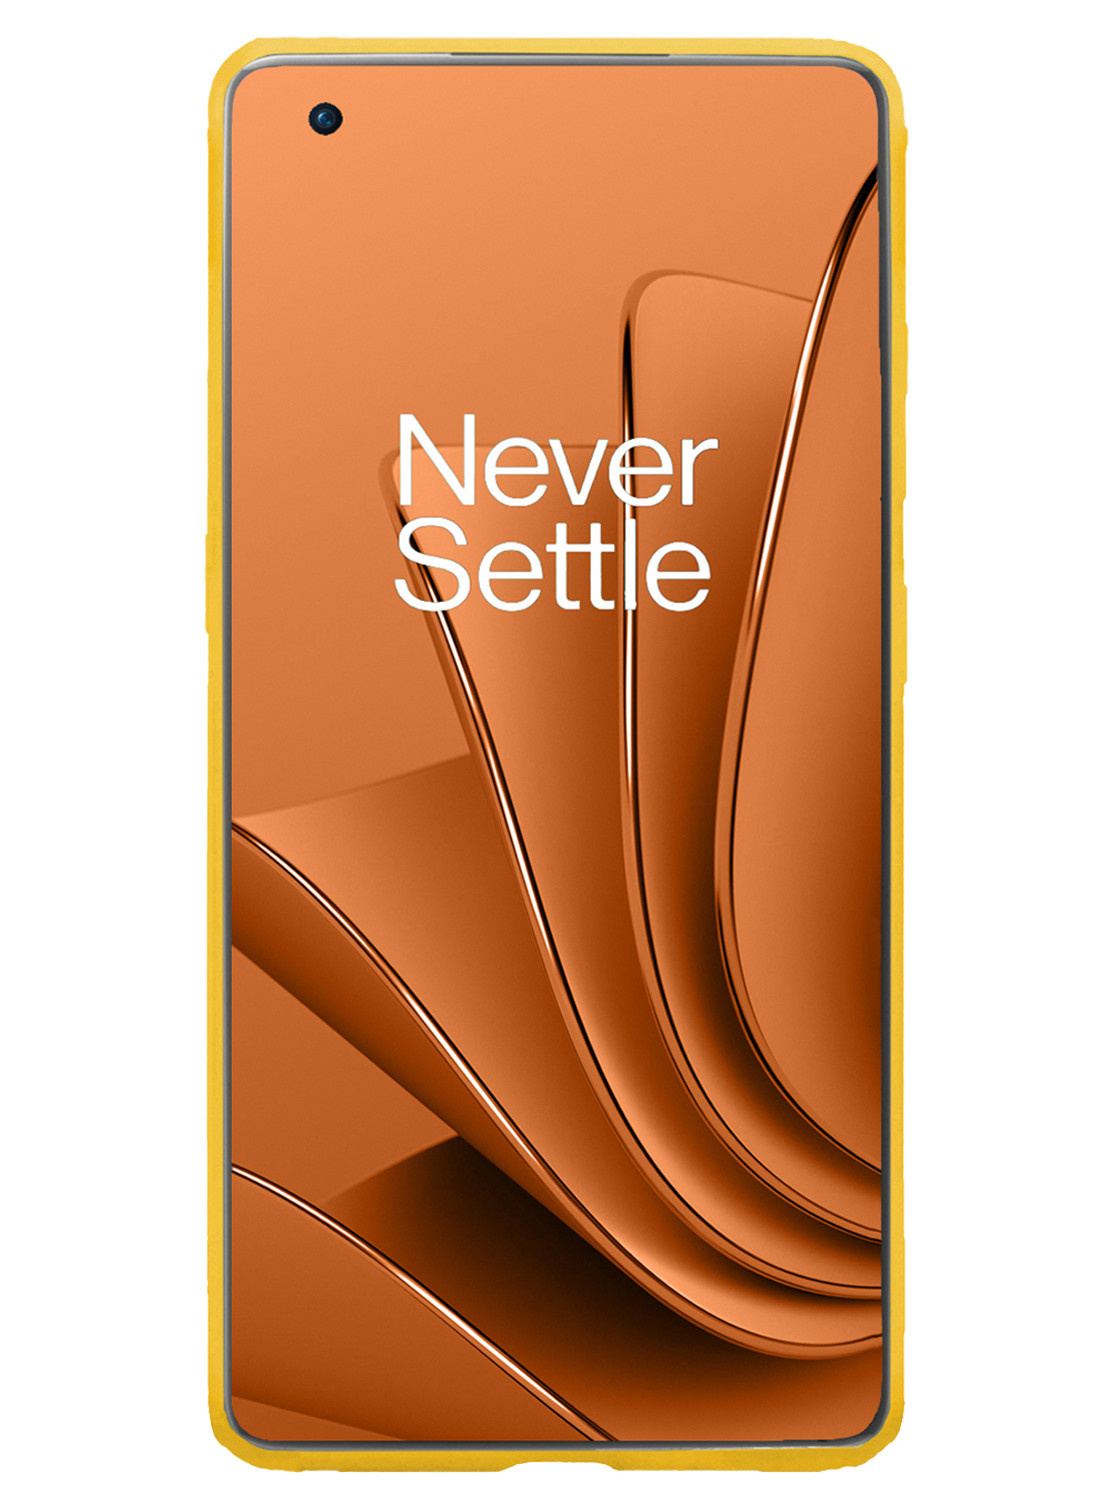 Nomfy OnePlus 10 Pro Hoesje Siliconen - OnePlus 10 Pro Hoesje Geel Case - OnePlus 10 Pro Cover Siliconen Back Cover - Geel